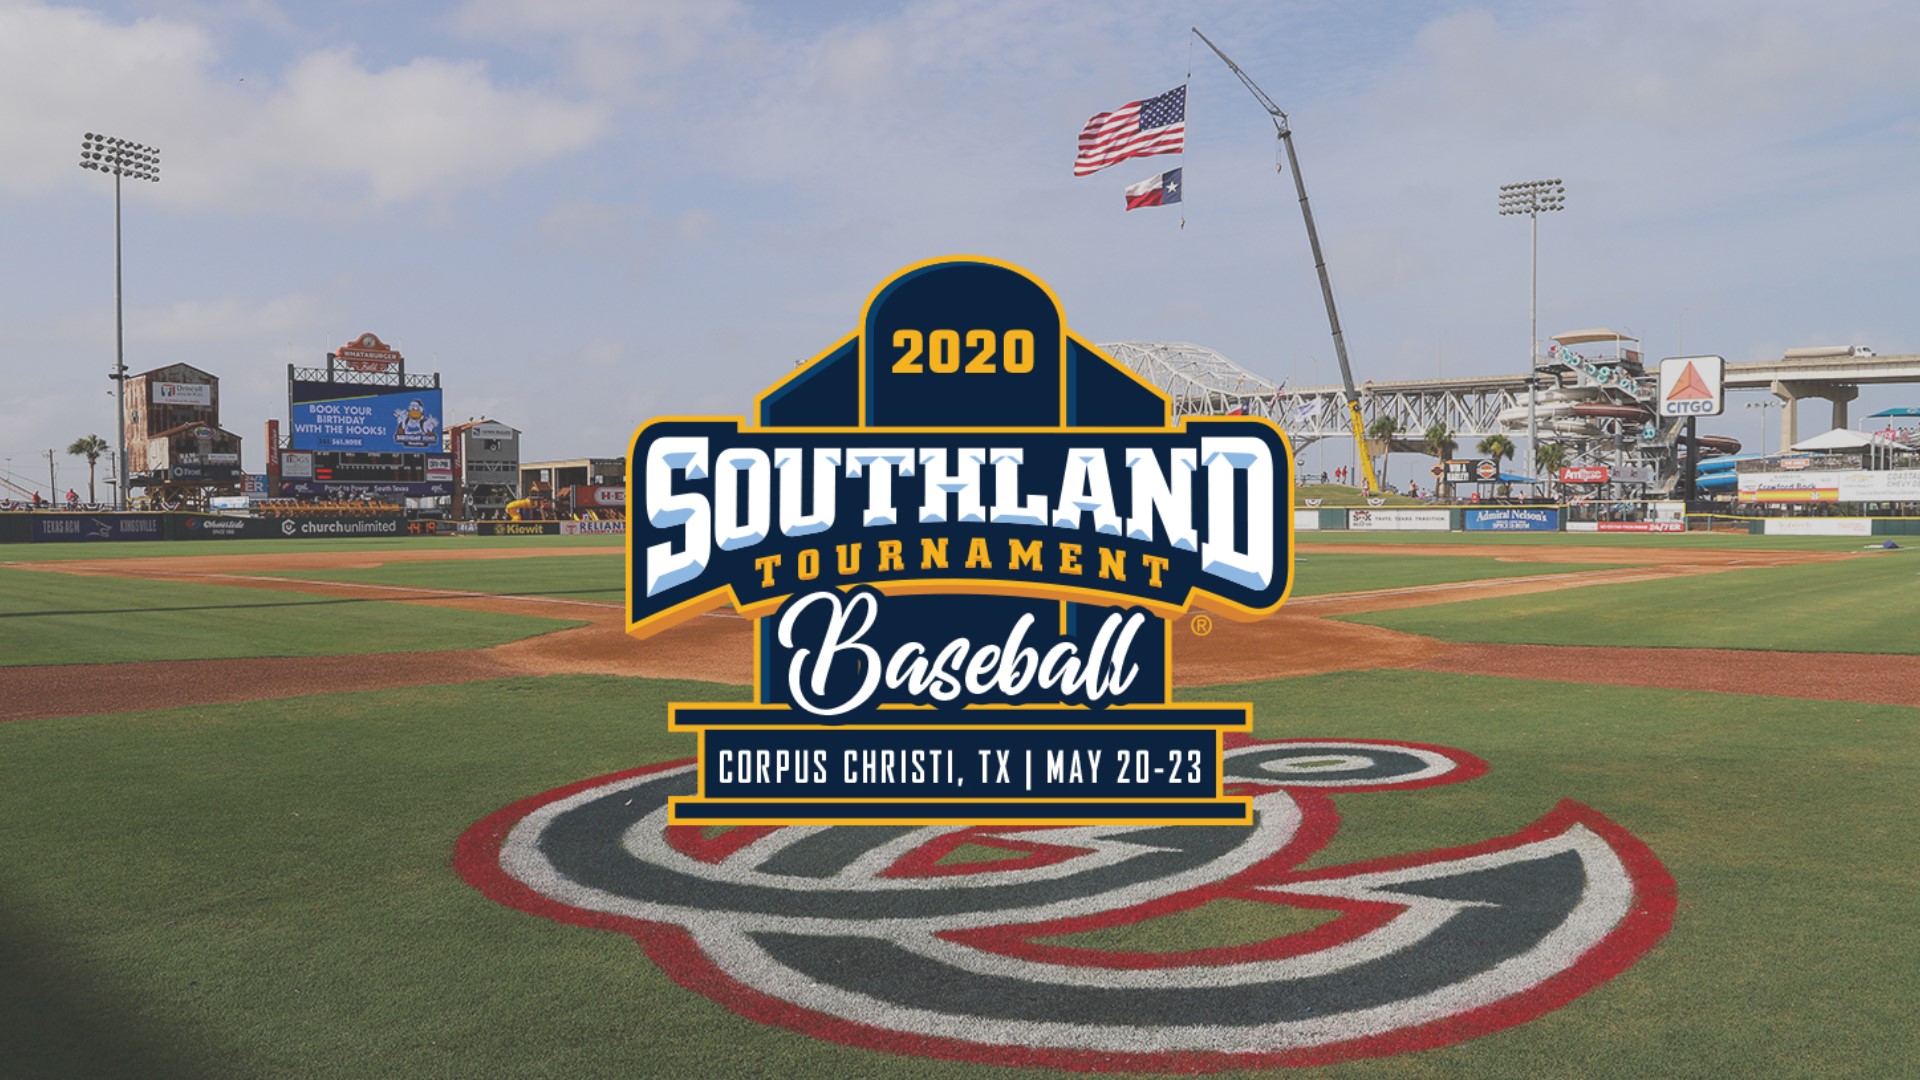 Southland Conference Baseball Tournament held in Corpus Christi